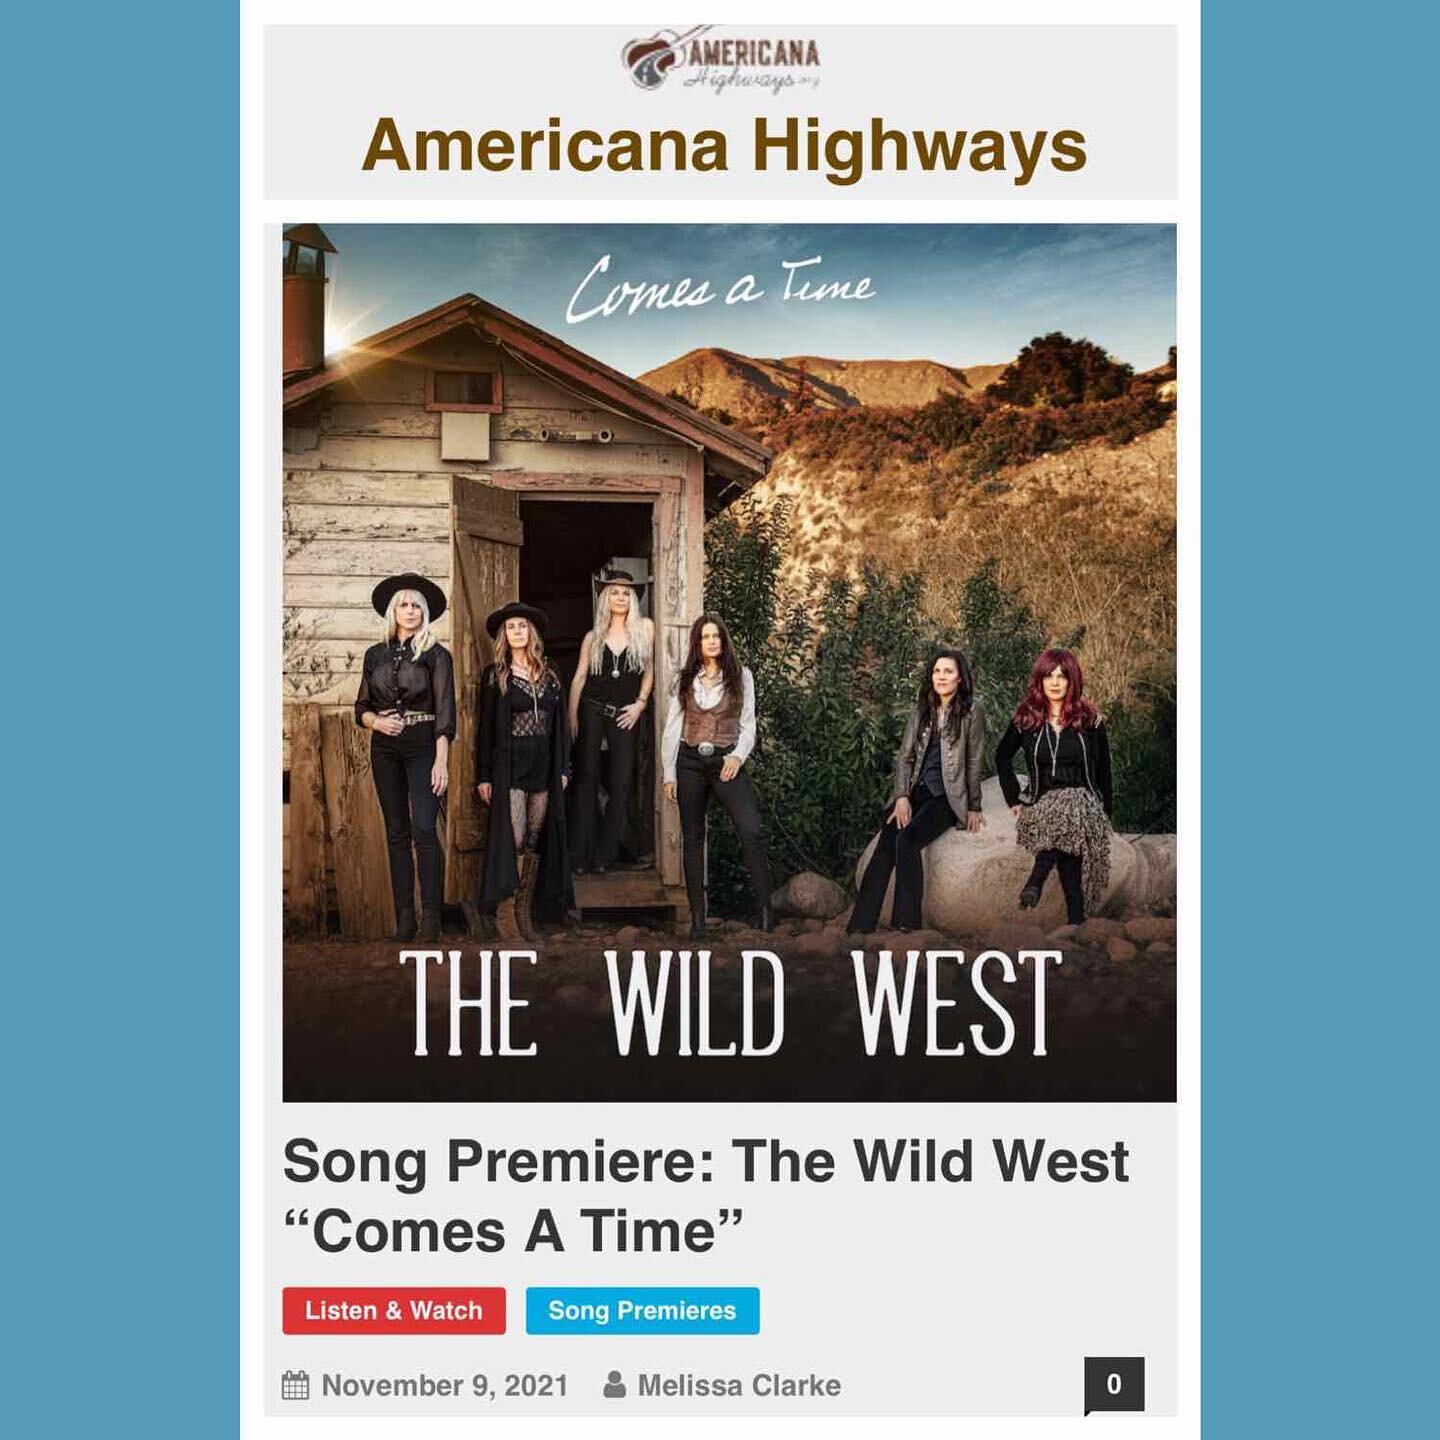 Thank you to Melissa Clarke and Americana Highways for premiering our new single &ldquo;Comes A Time&rdquo; (Neil Young)! Visit link in bio ⤴️ for a first listen. We put this together to release and honor Neil Young on his birthday coming up this Fri